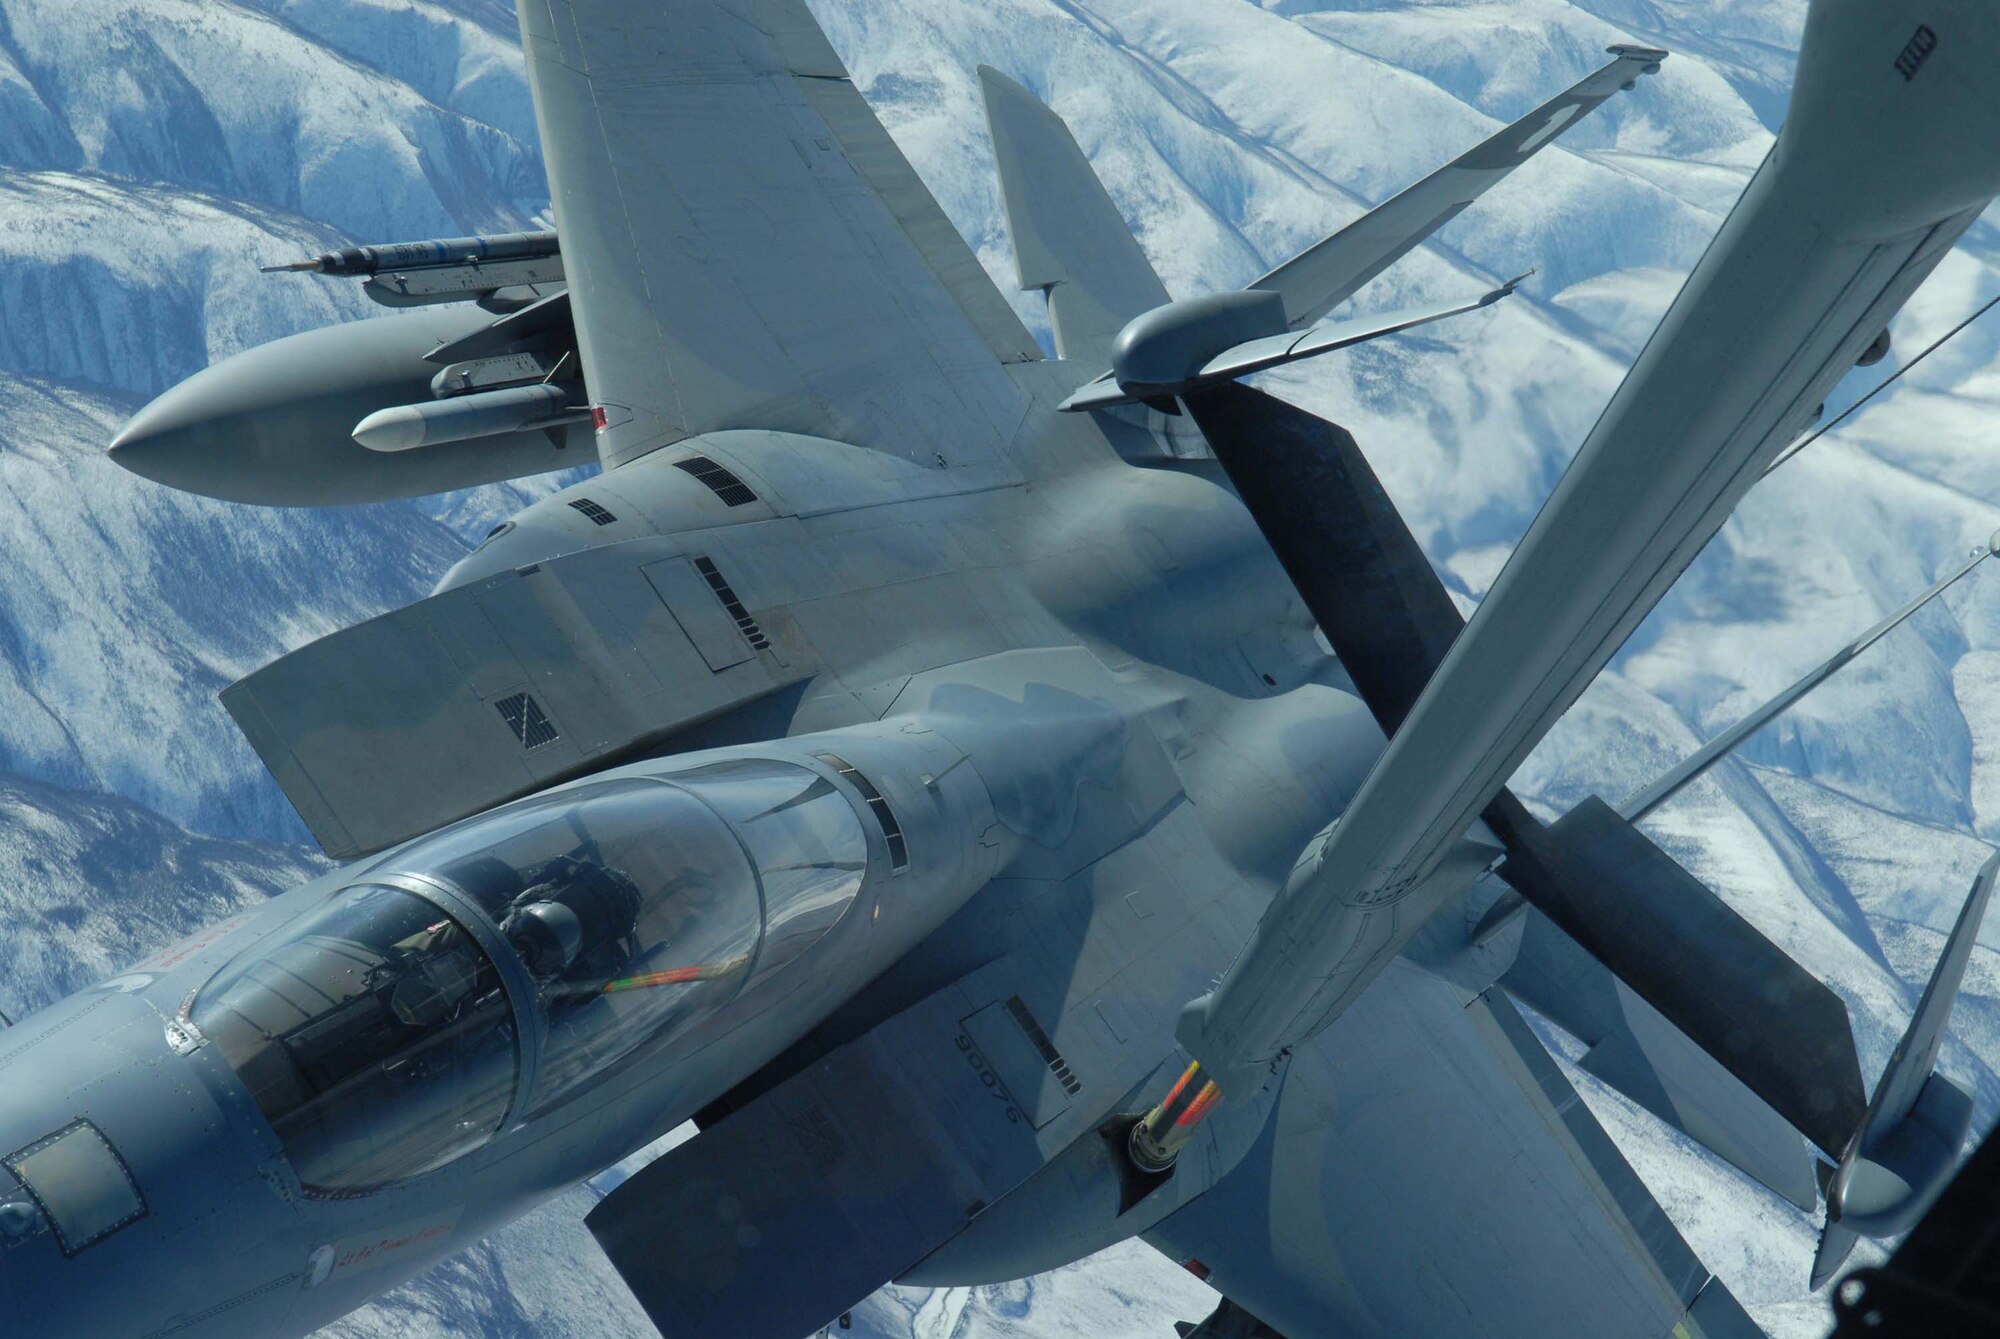 EIELSON AIR FORCE BASE, Alaska -- An F-15 Strike Eagle, 60th Fighter Squadron, Eglin AFB, Florida, receives fuel from a KC-10 extender over the Pacific Alaska Range Complex on April 18 during Red Flag-Alaska 07-1. Red Flag-Alaska is a Pacific Air Forces-directed field training exercise for U.S. forces flown under simulated air combat conditions. It is conducted on the Pacific Alaskan Range Complex with air operations flown out of Eielson and Elmendorf Air Force Bases. (U.S. Air Force Photo by Airman 1st Class Jonathan Snyder) 